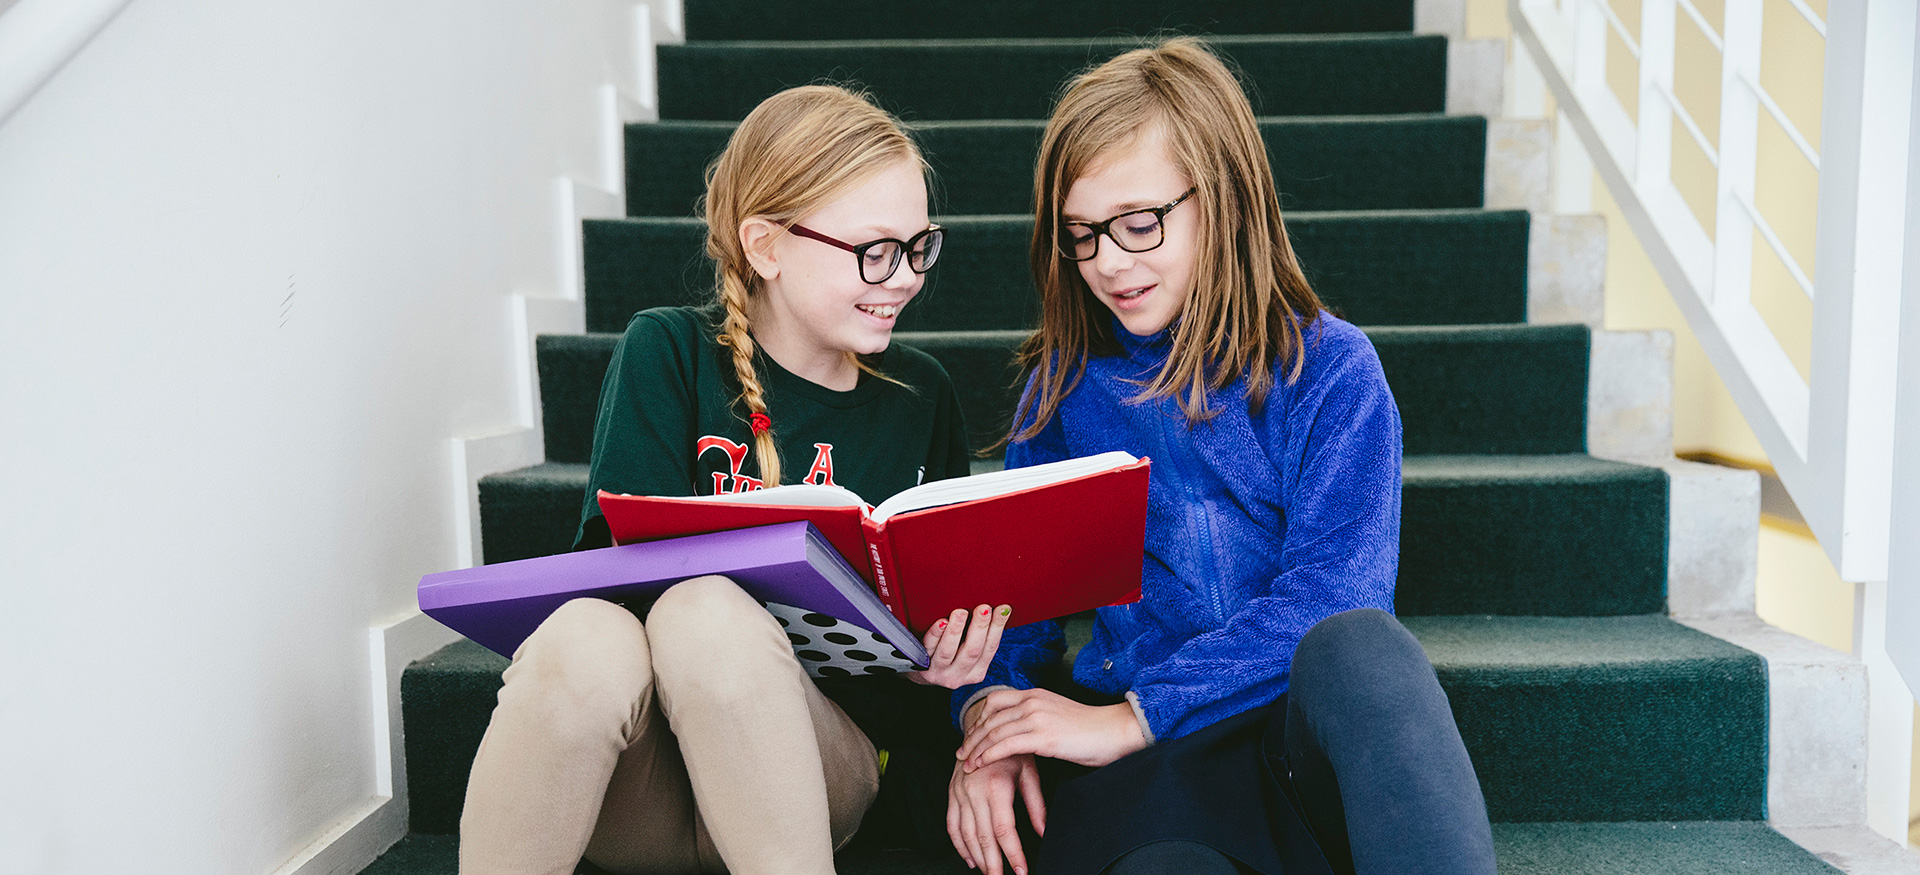 Two students sitting on school stairs reading a book together.